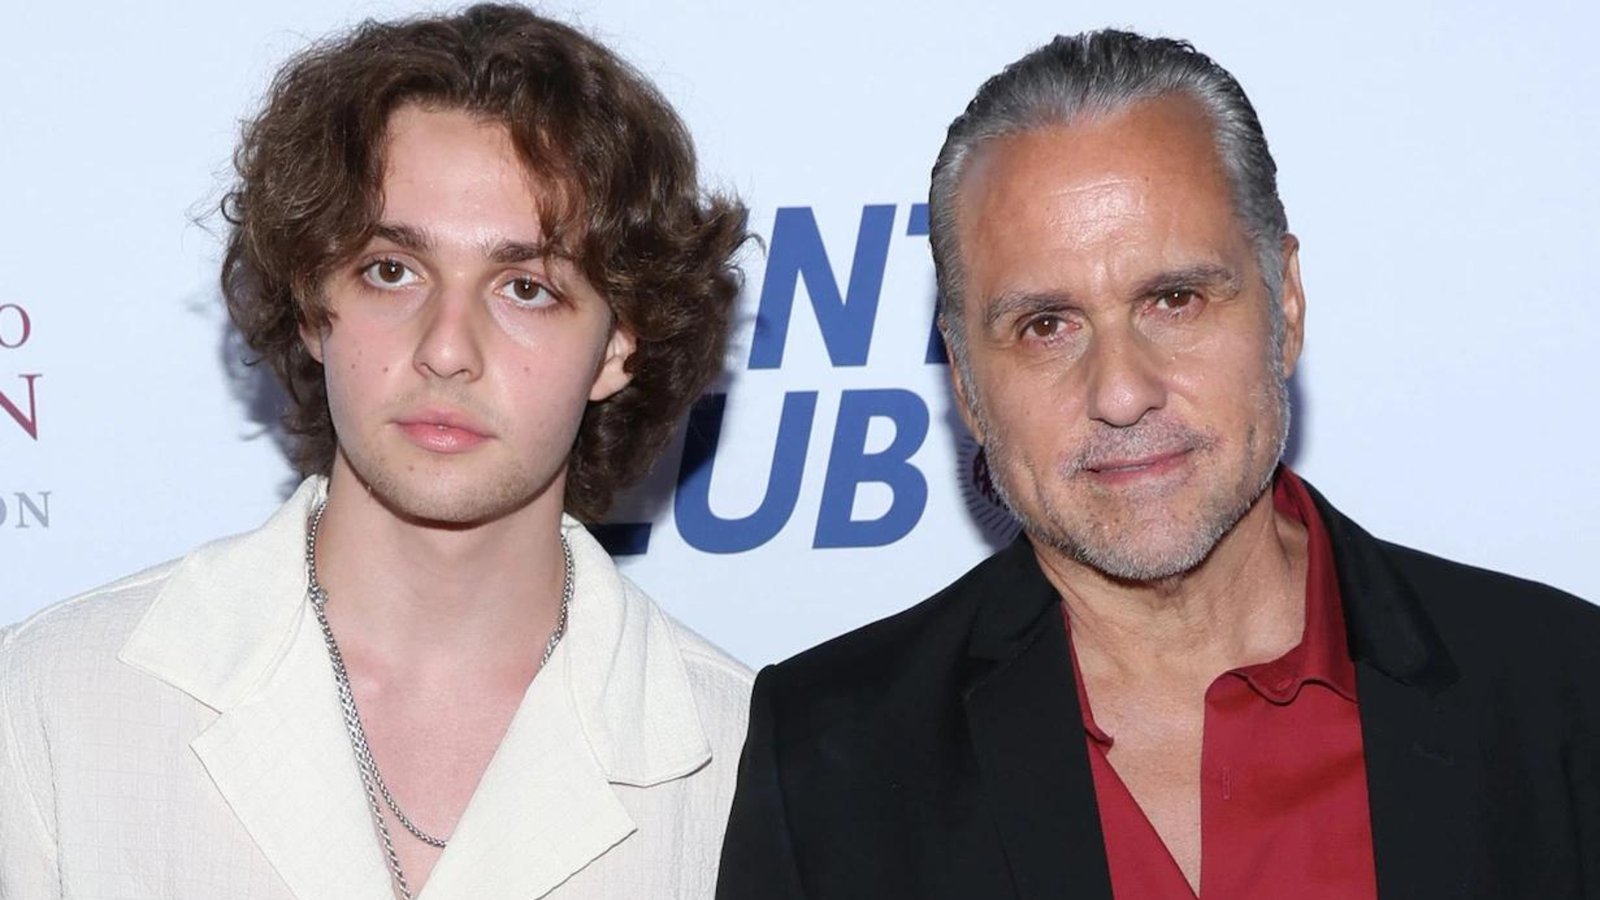 Maurice Benard Updates Fans on Son Joshua's Condition After Accident